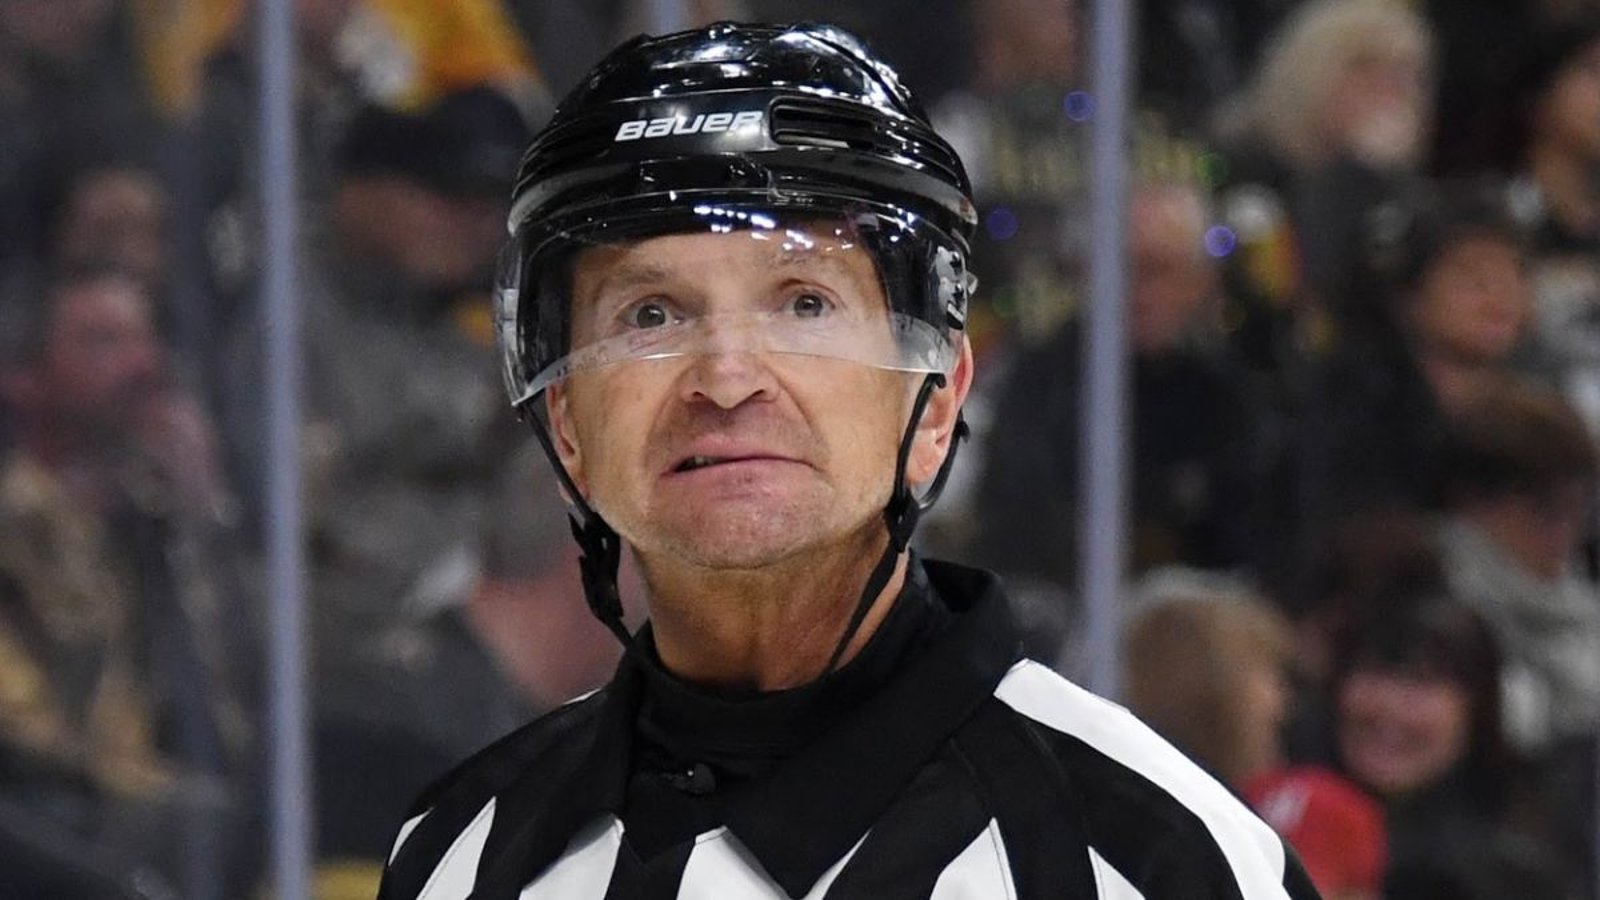 Disgraced referee Tim Peel says ‘he’s back’ on social media and gets rough welcome